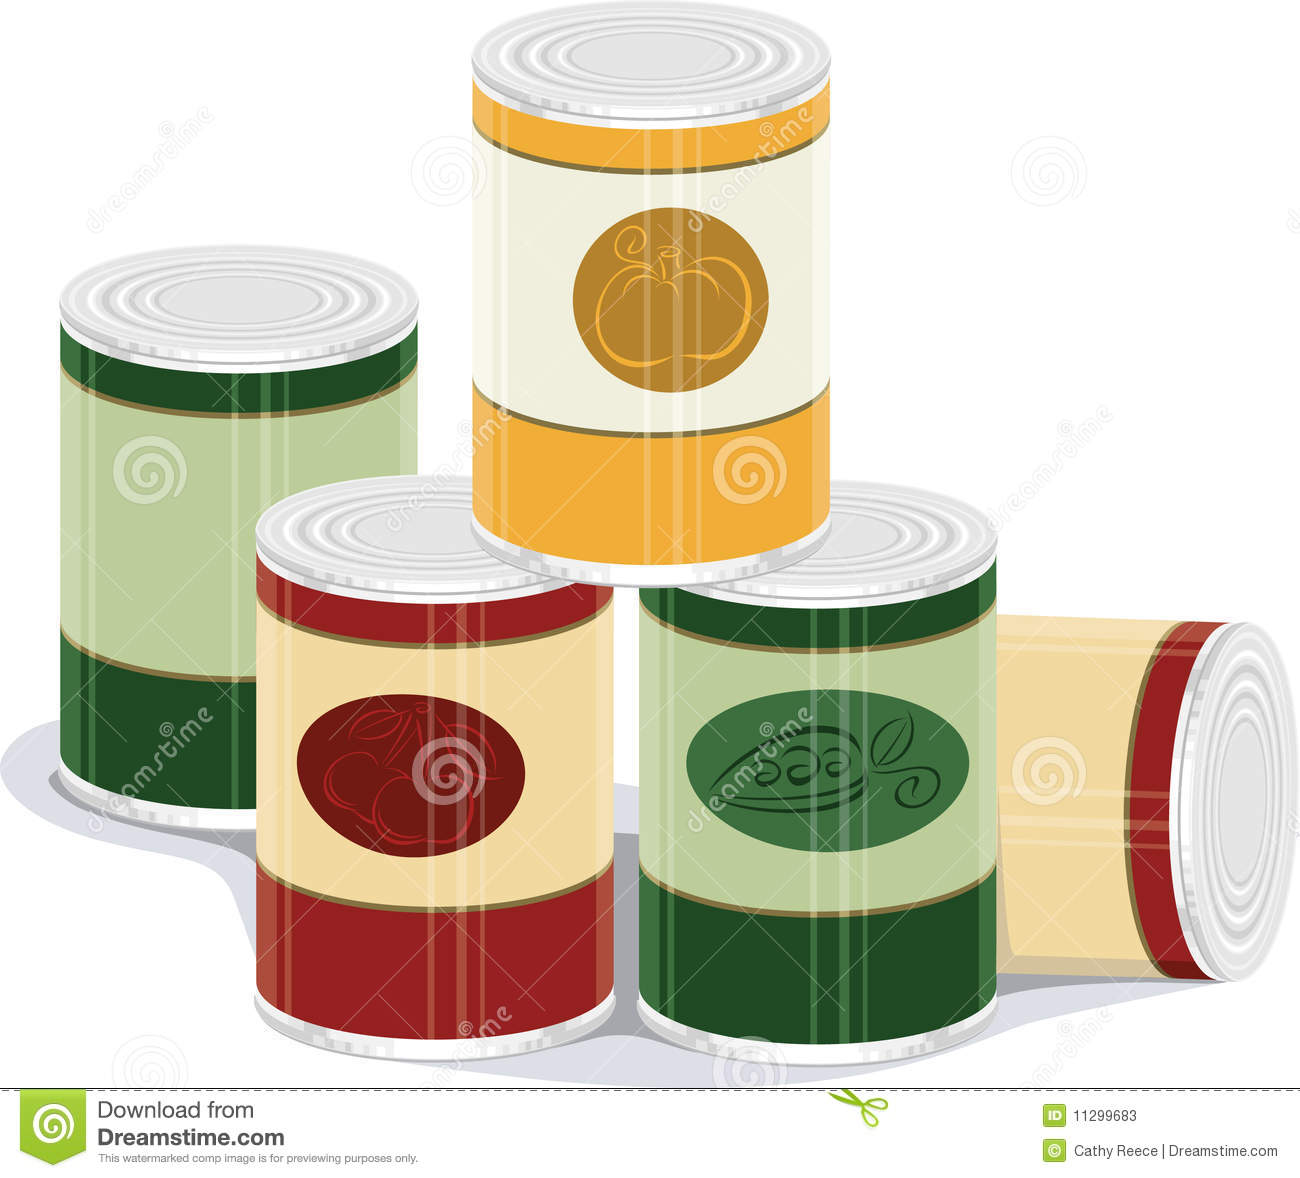 Canned Goods Stock Photos   Image  11299683